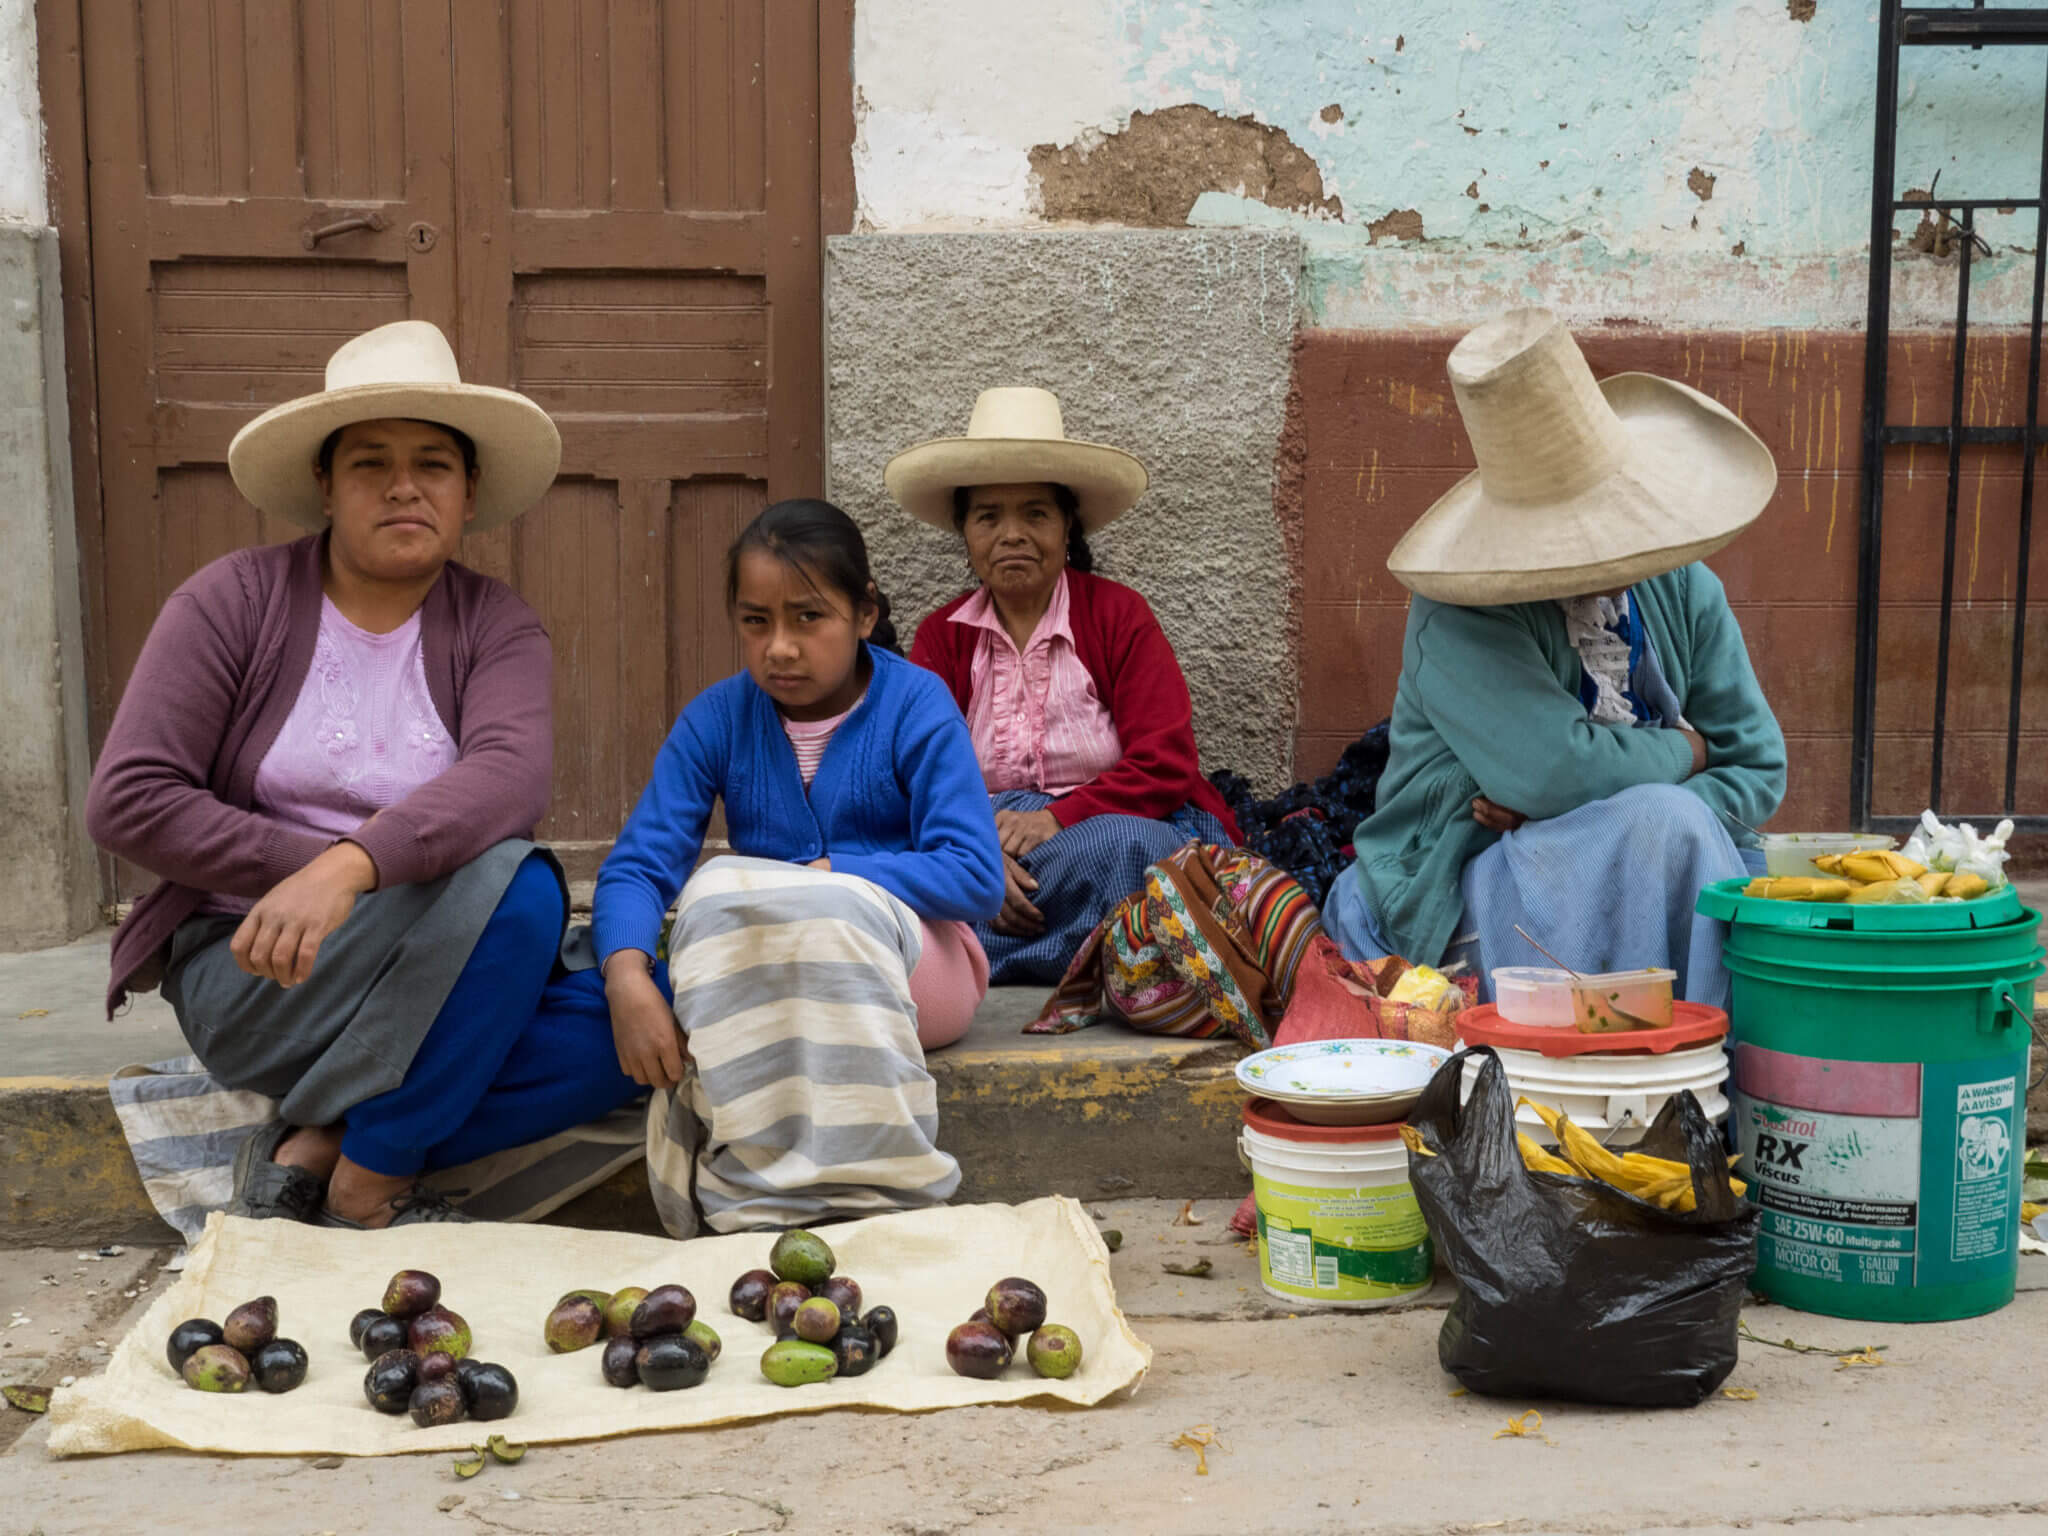 volunteering abroad in peru is an amazing experience for any gap year